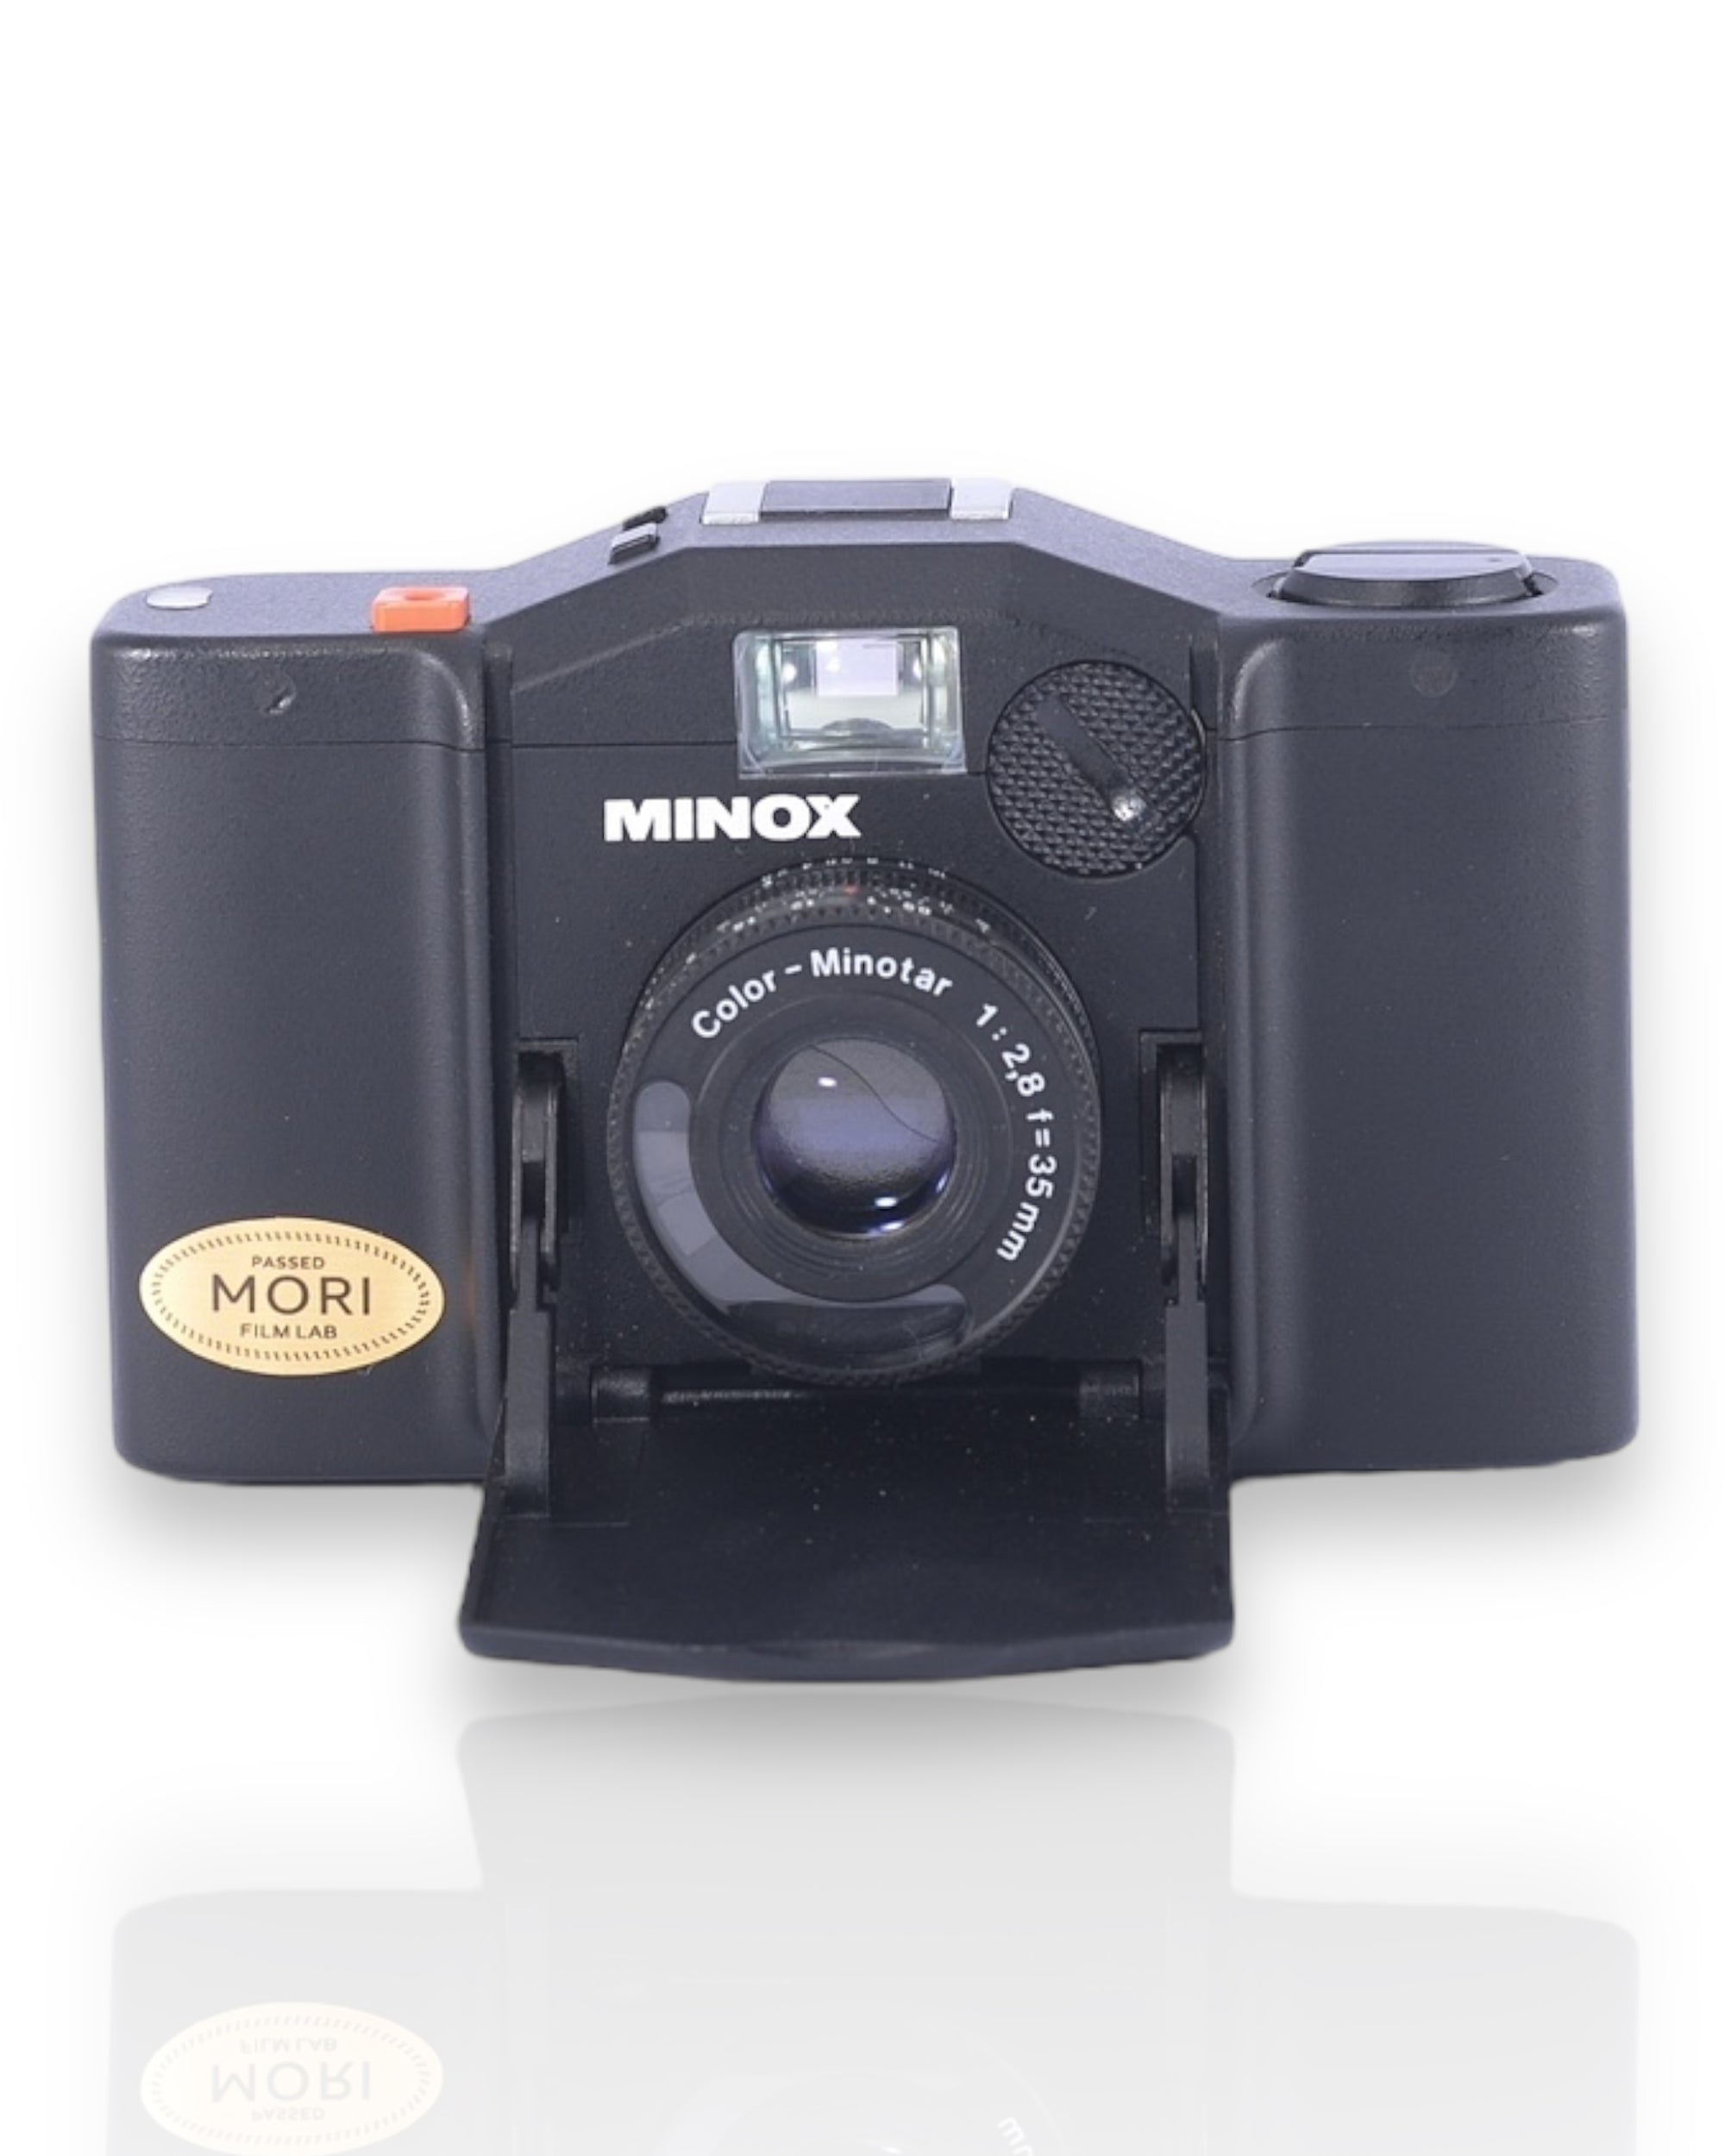 Minox 35 GL 35mm point and shoot film camera with 35mm f2.8 Lens